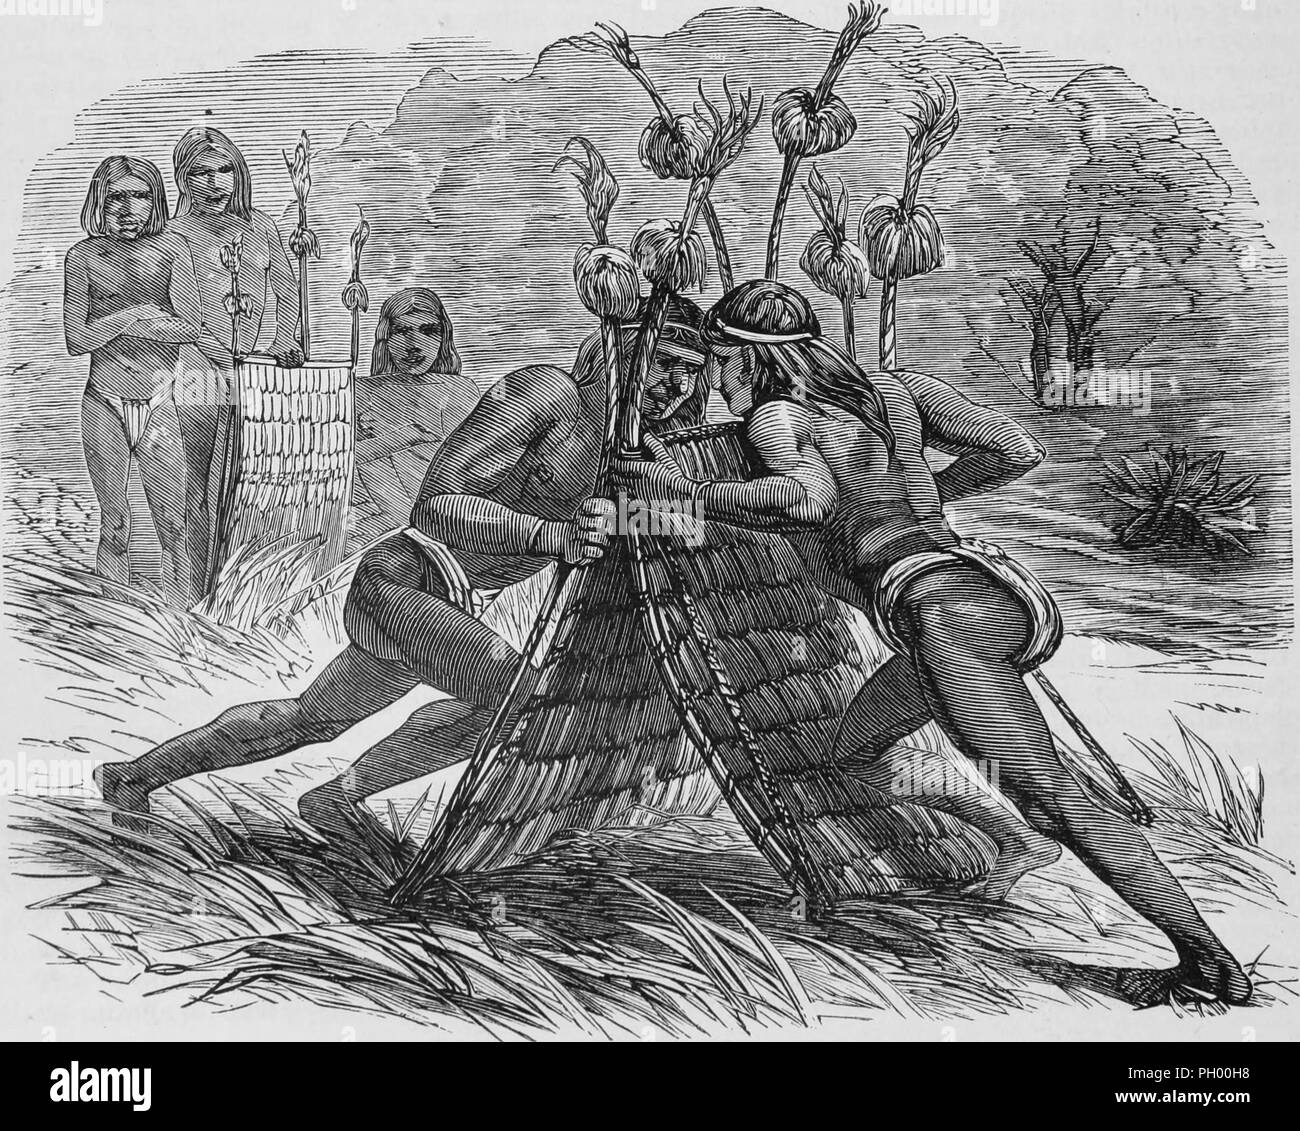 Black and white vintage print, depicting two Warao men, wearing loincloths and headbands, engaging in shield wrestling by pressing against each other while holding large, rectangular, woven shields, with several other men watching in the background, published in John George Wood's volume 'The uncivilized races of men in all countries of the world, being a comprehensive account of their manners and customs, and of their physical, social, mental, moral and religious characteristics', 1877. Courtesy Internet Archive. () Stock Photo